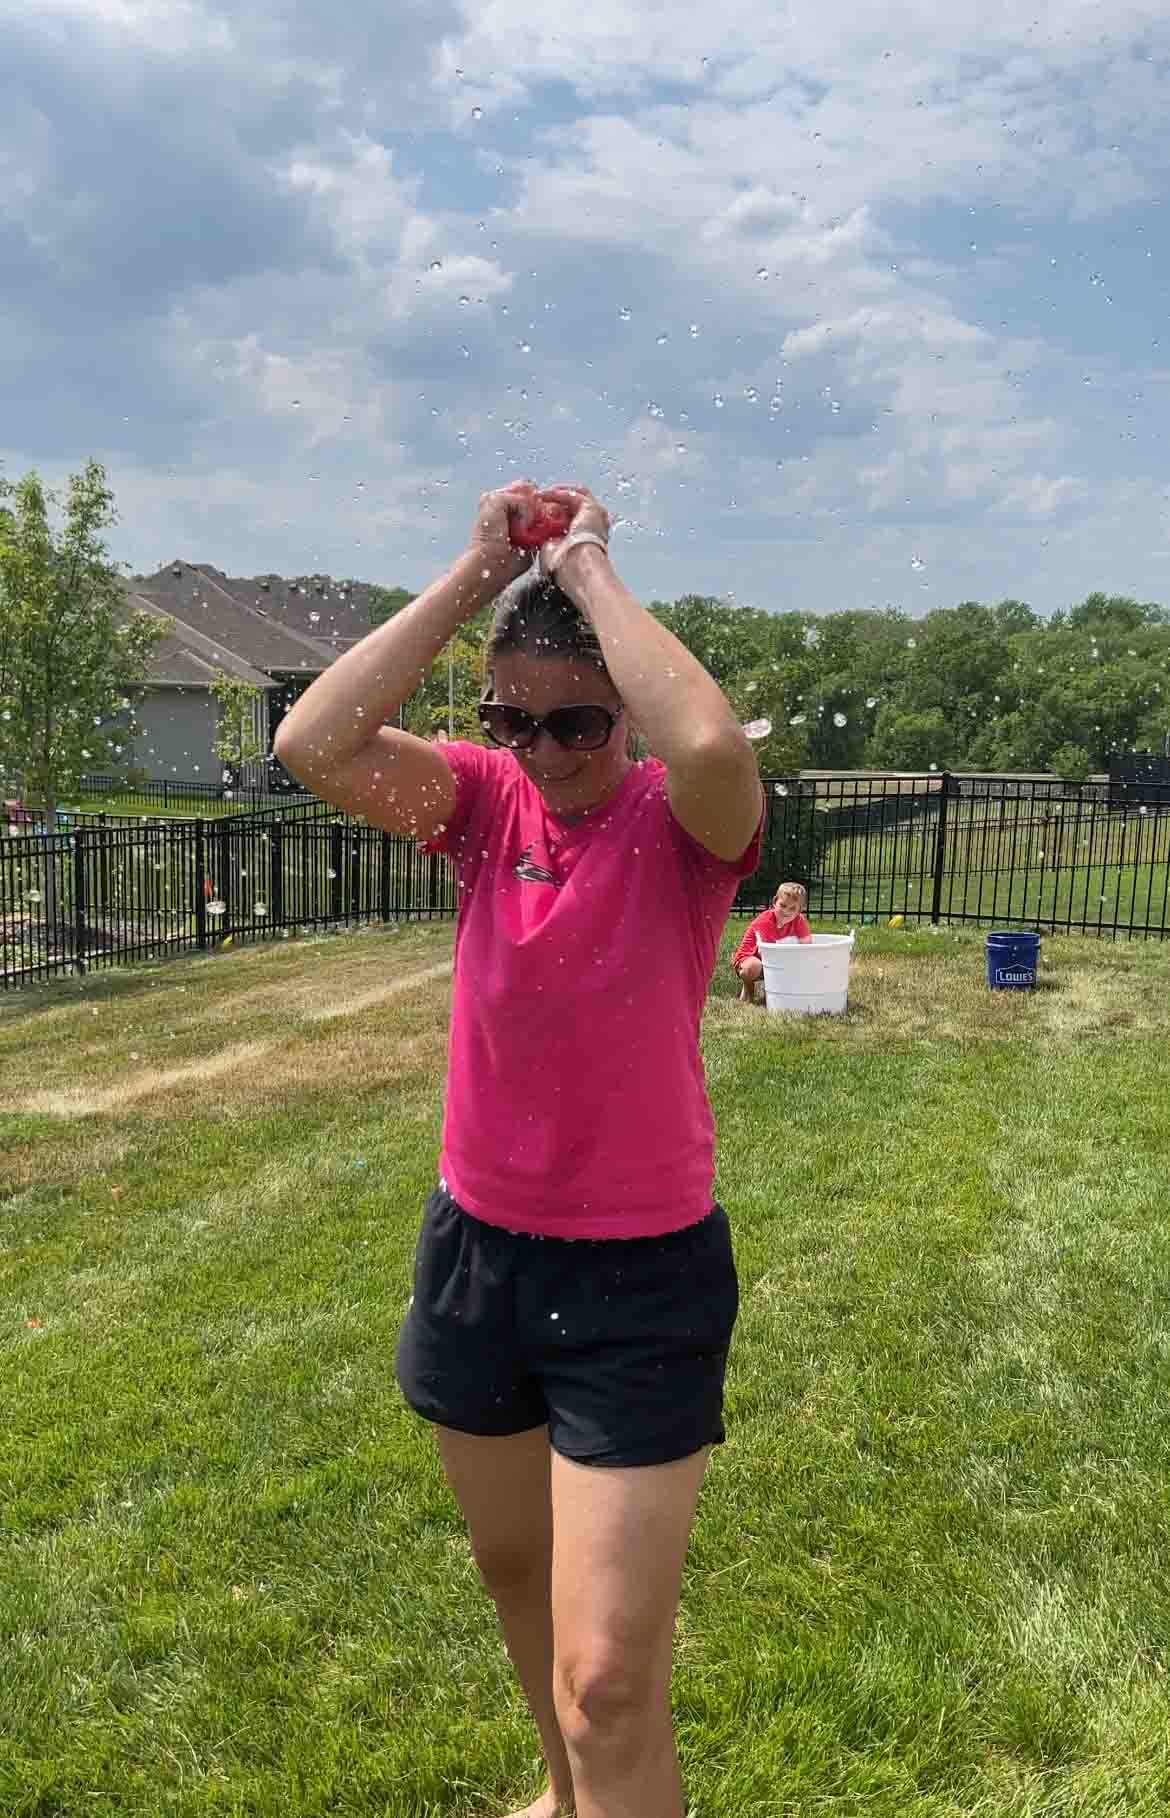 woman breaking a water balloon over her head